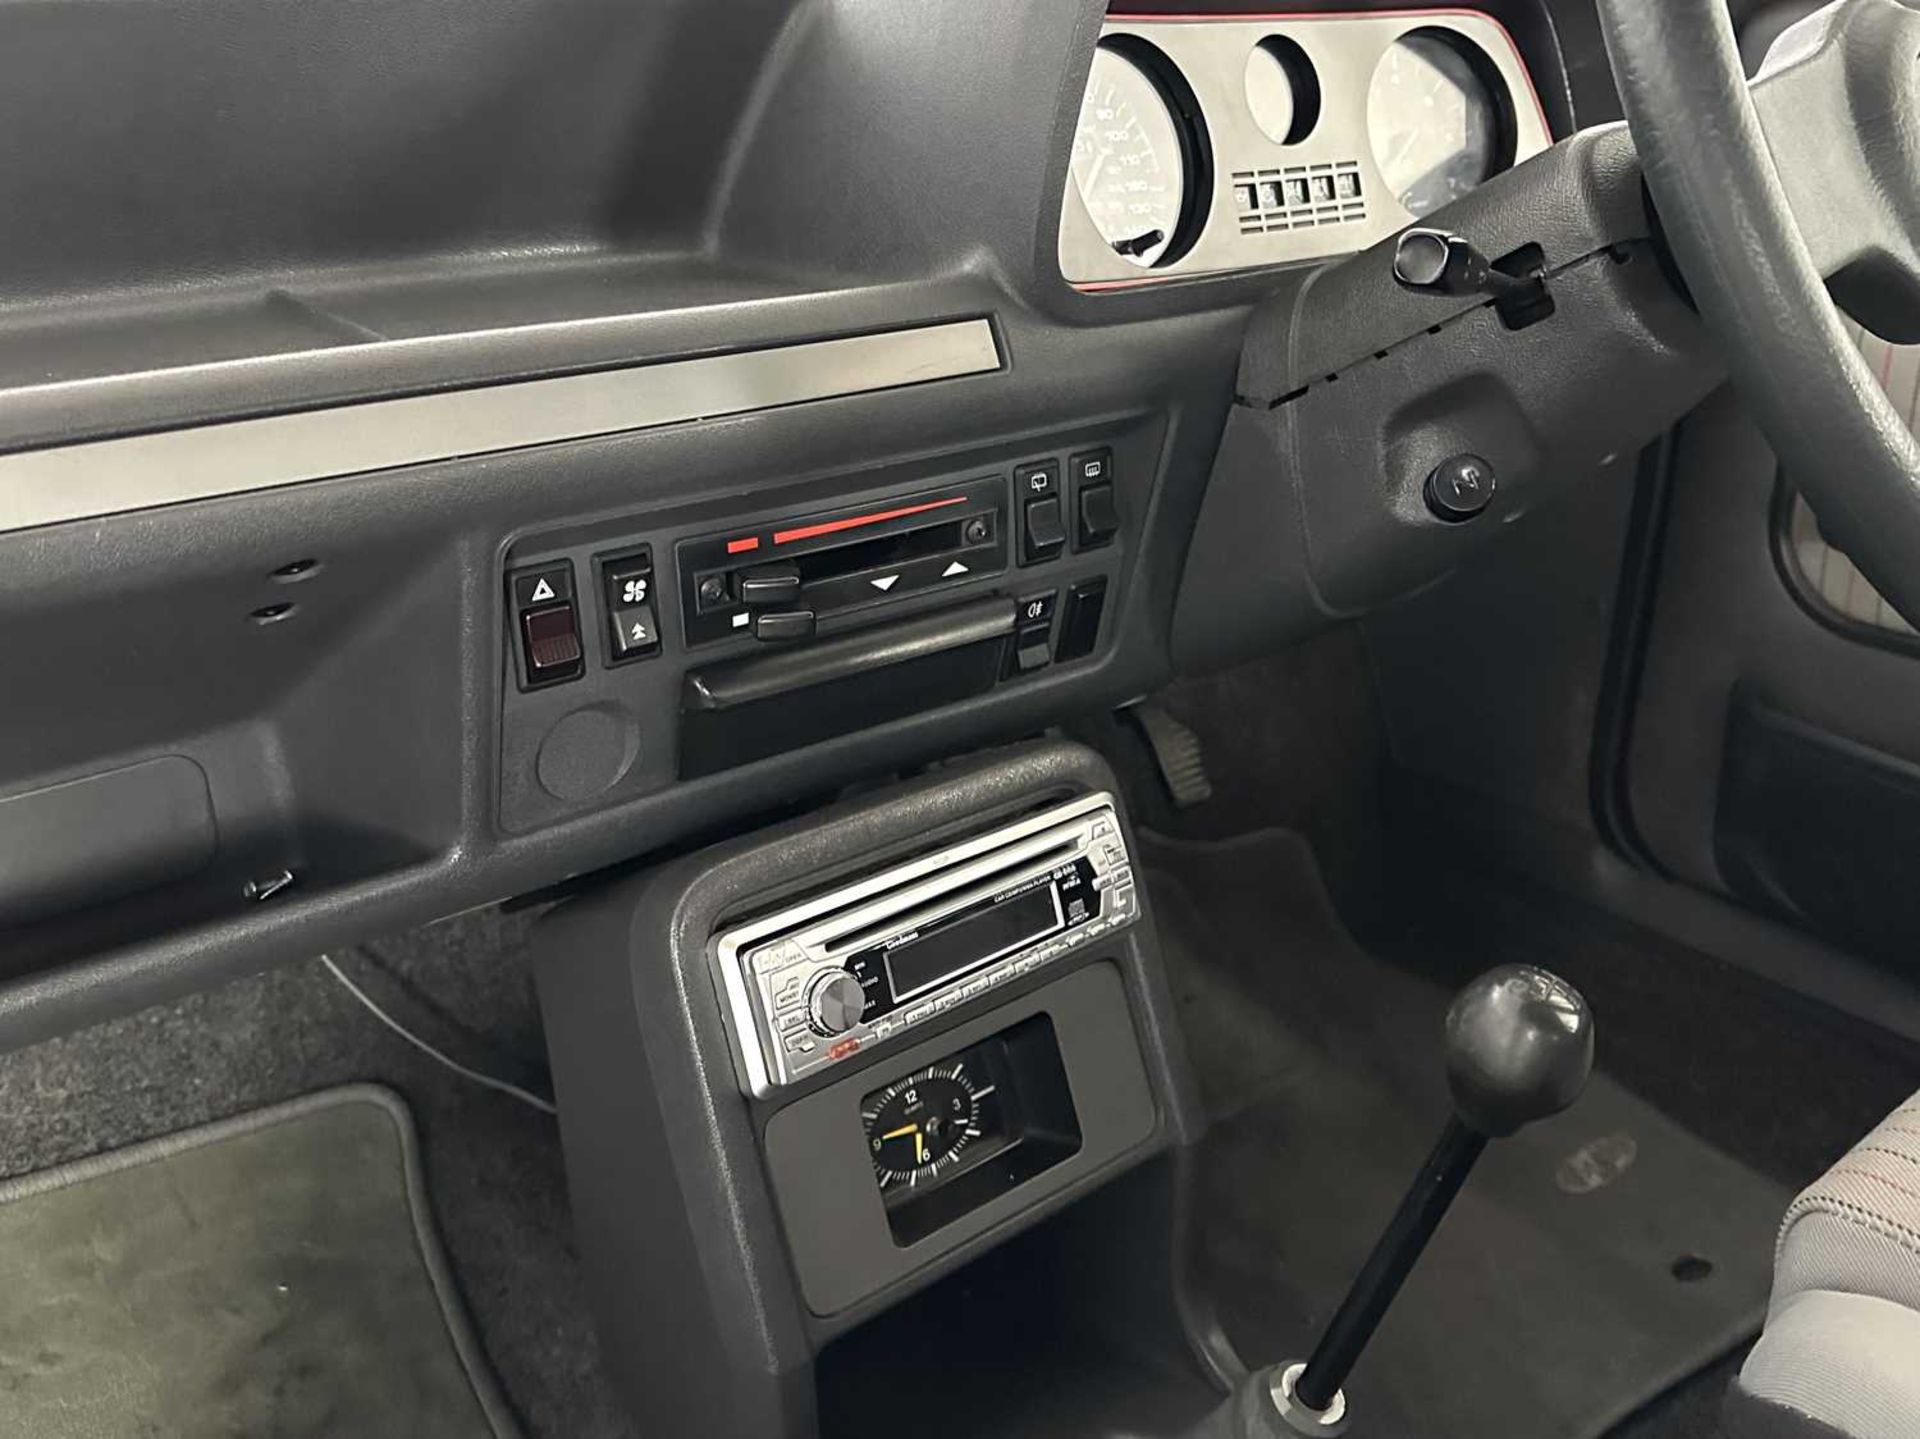 1983 Ford Fiesta - Image 24 of 31